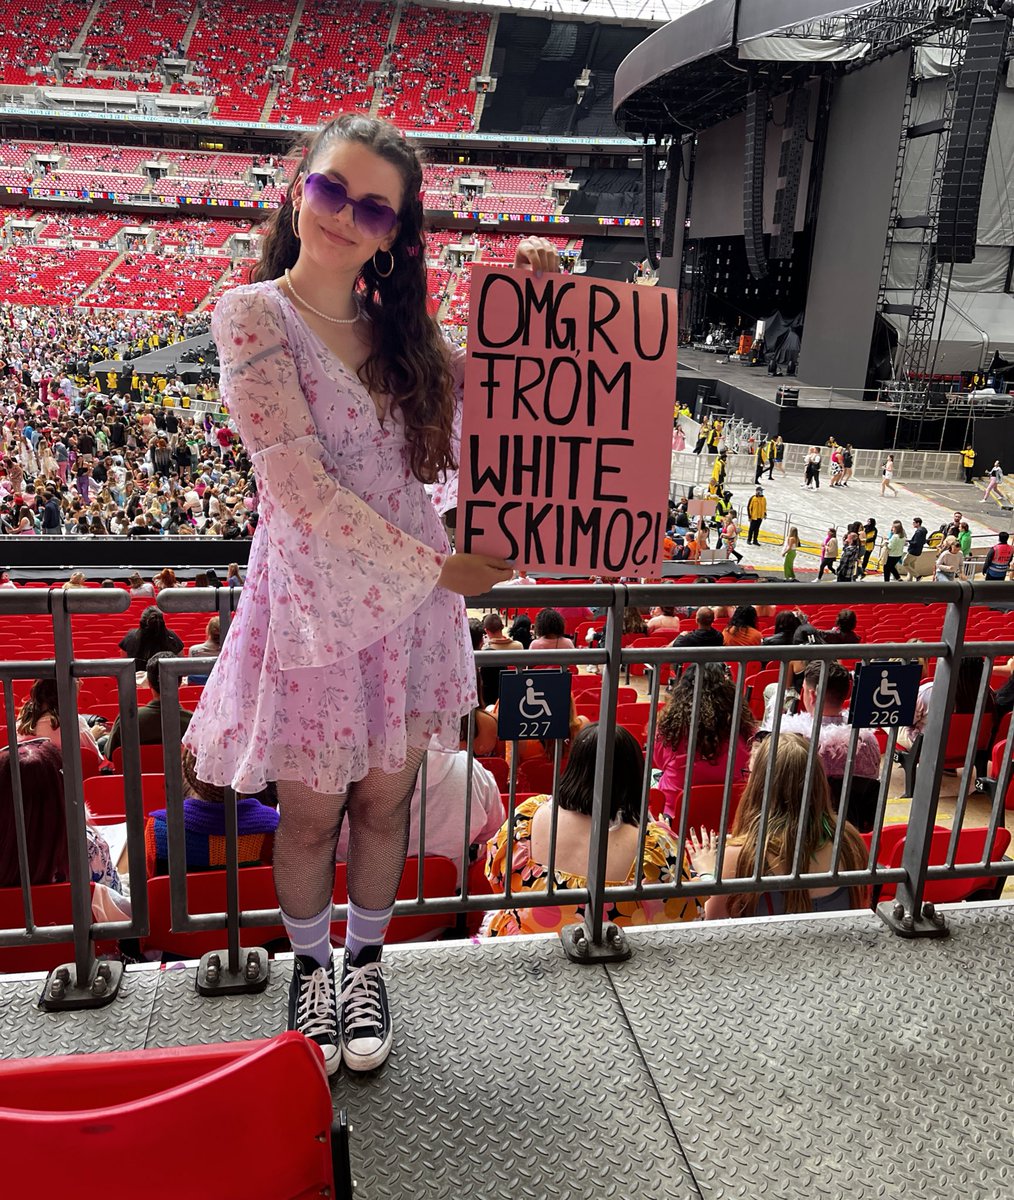 i think this super underground artist from white eskimo is playing at wembley tonight? 

#HSLOTWembley #WembleyN2 #HarryStyles #HarrieStyles #hslot